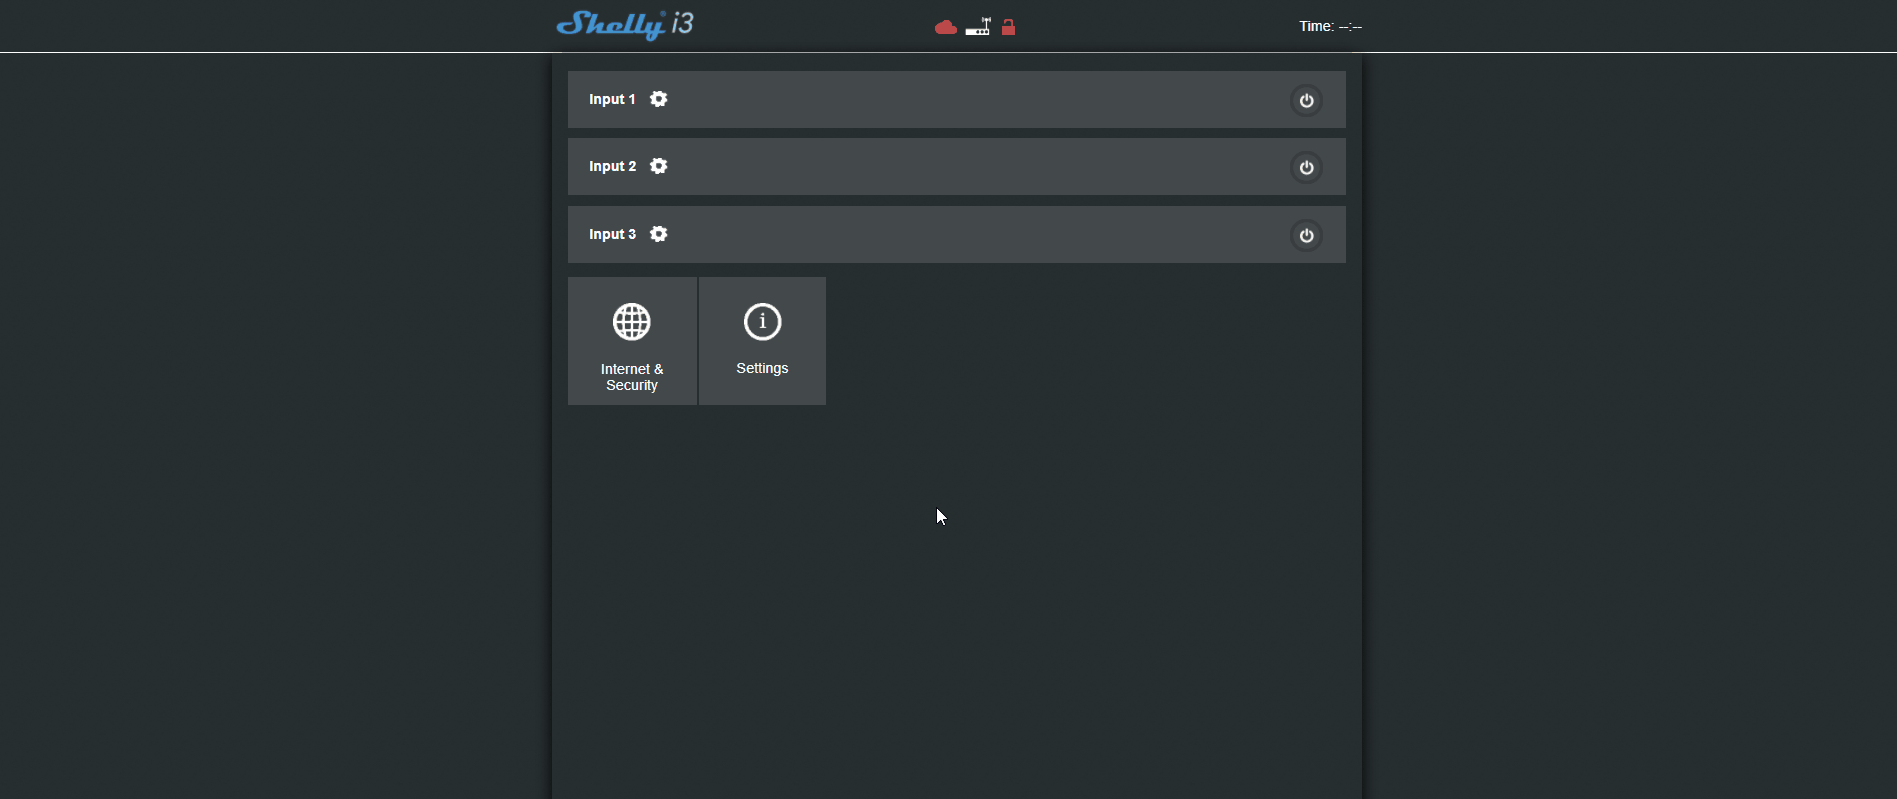 Enabling the wifi client mode to the shelly i3 form inside the device's web interface